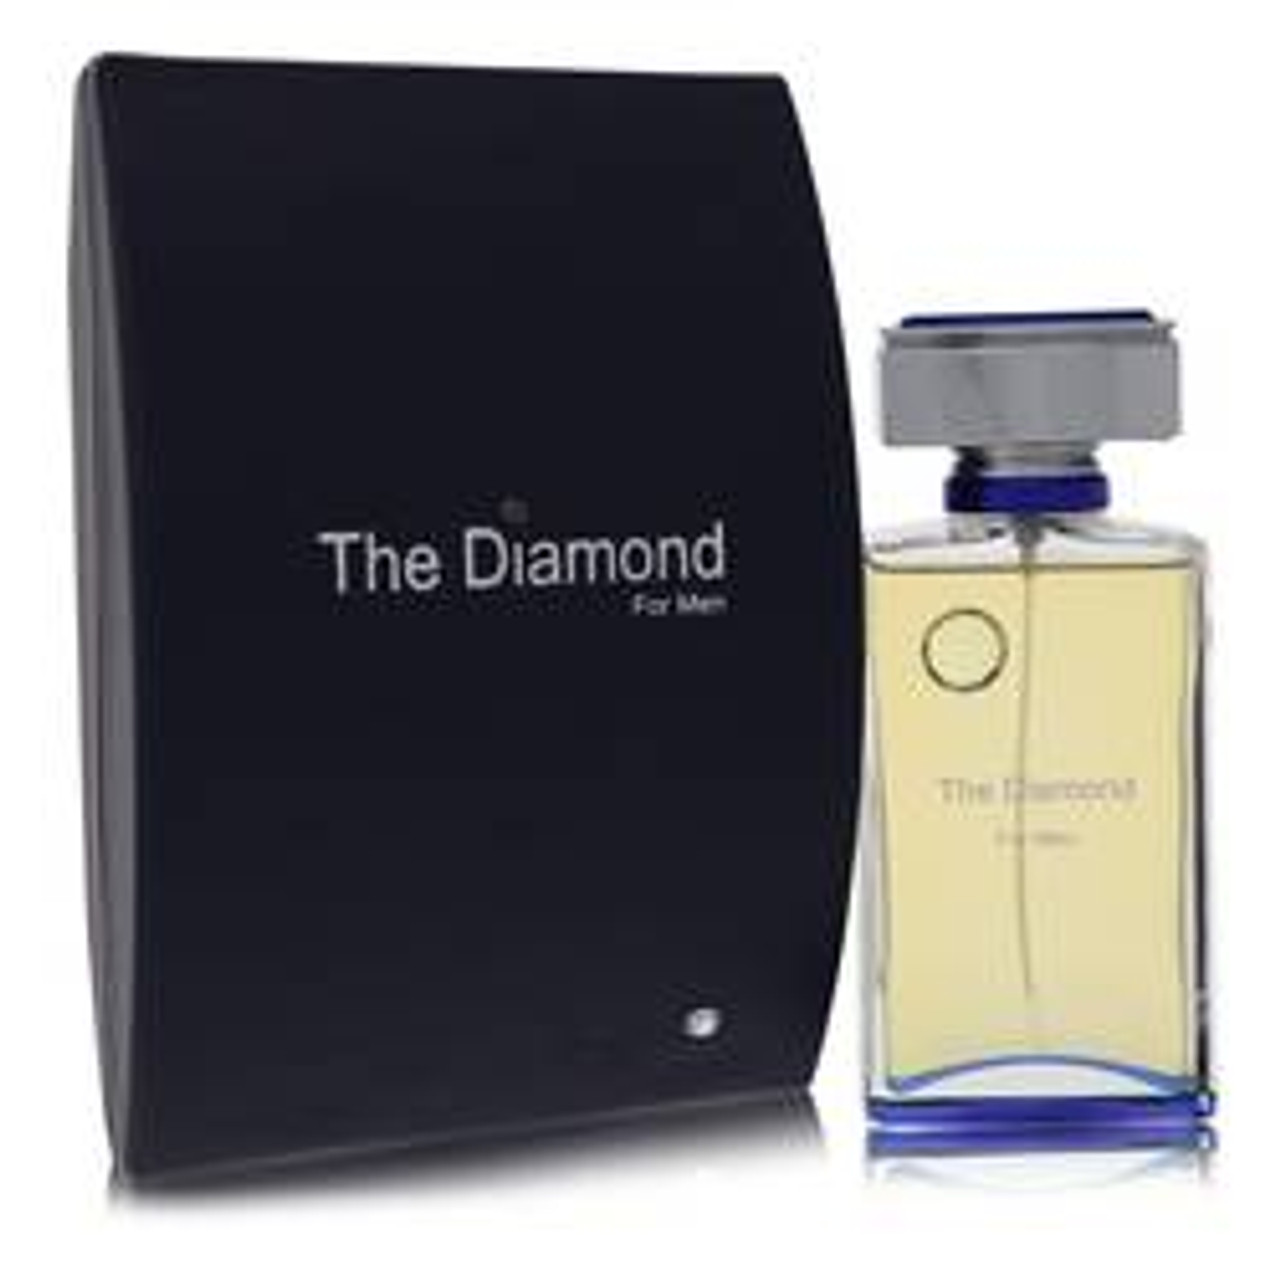 The Diamond Cologne By Cindy Crawford Eau De Parfum Spray 3.4 oz for Men - [From 50.33 - Choose pk Qty ] - *Ships from Miami